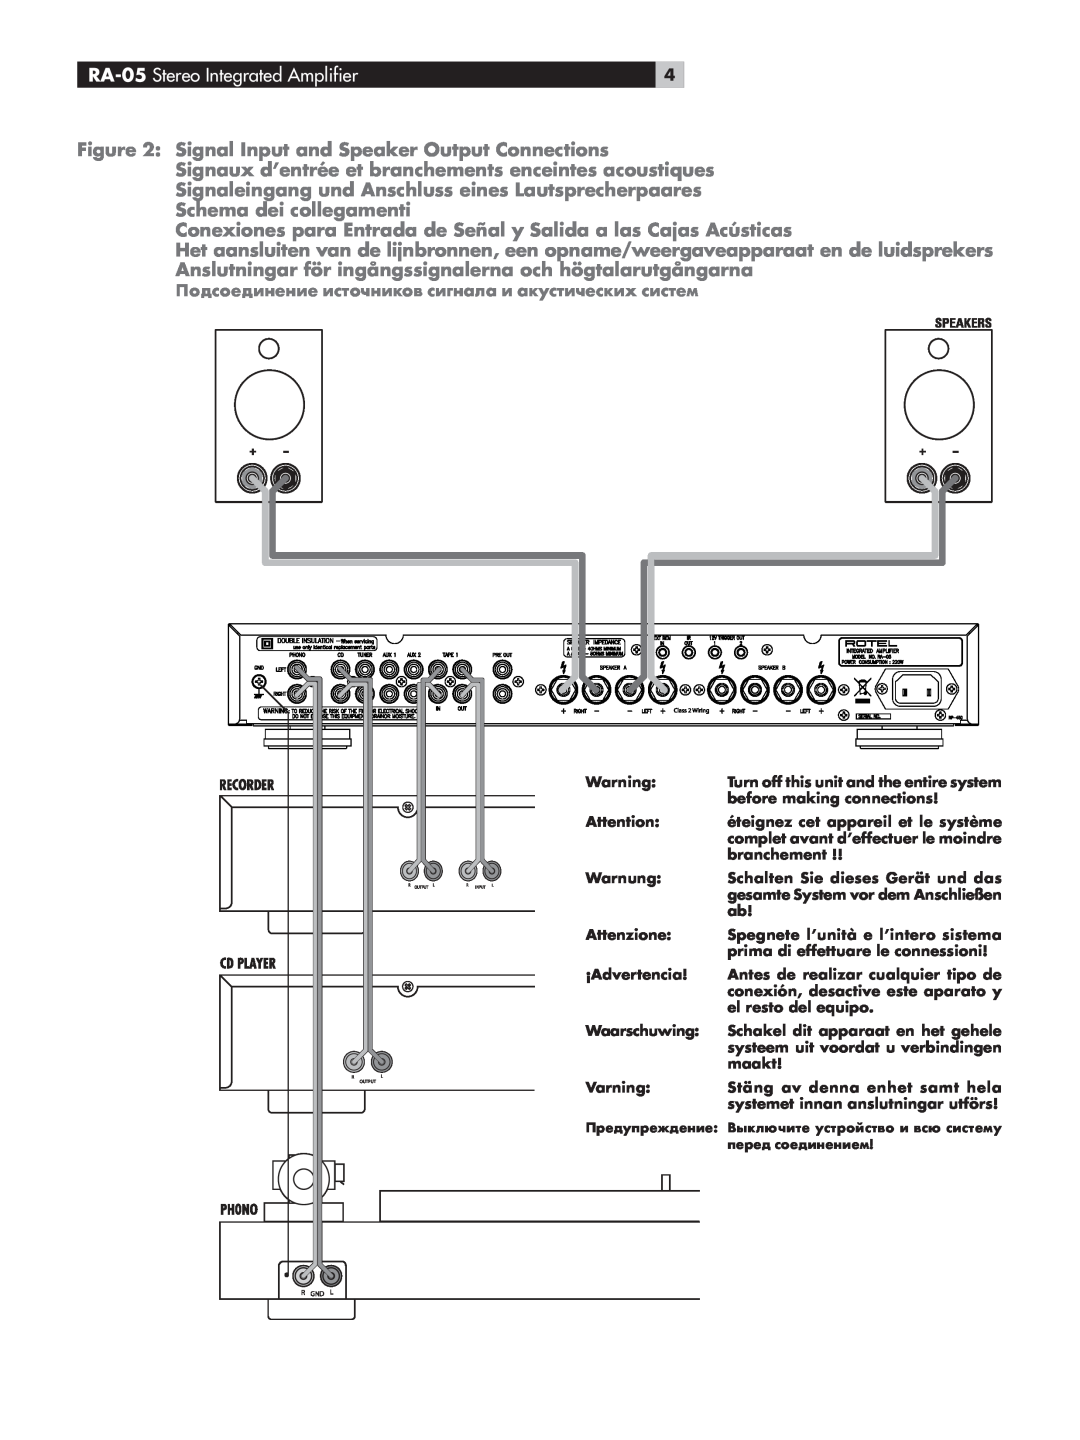 Rotel owner manual RA-05 Stereo Integrated Amplifier 